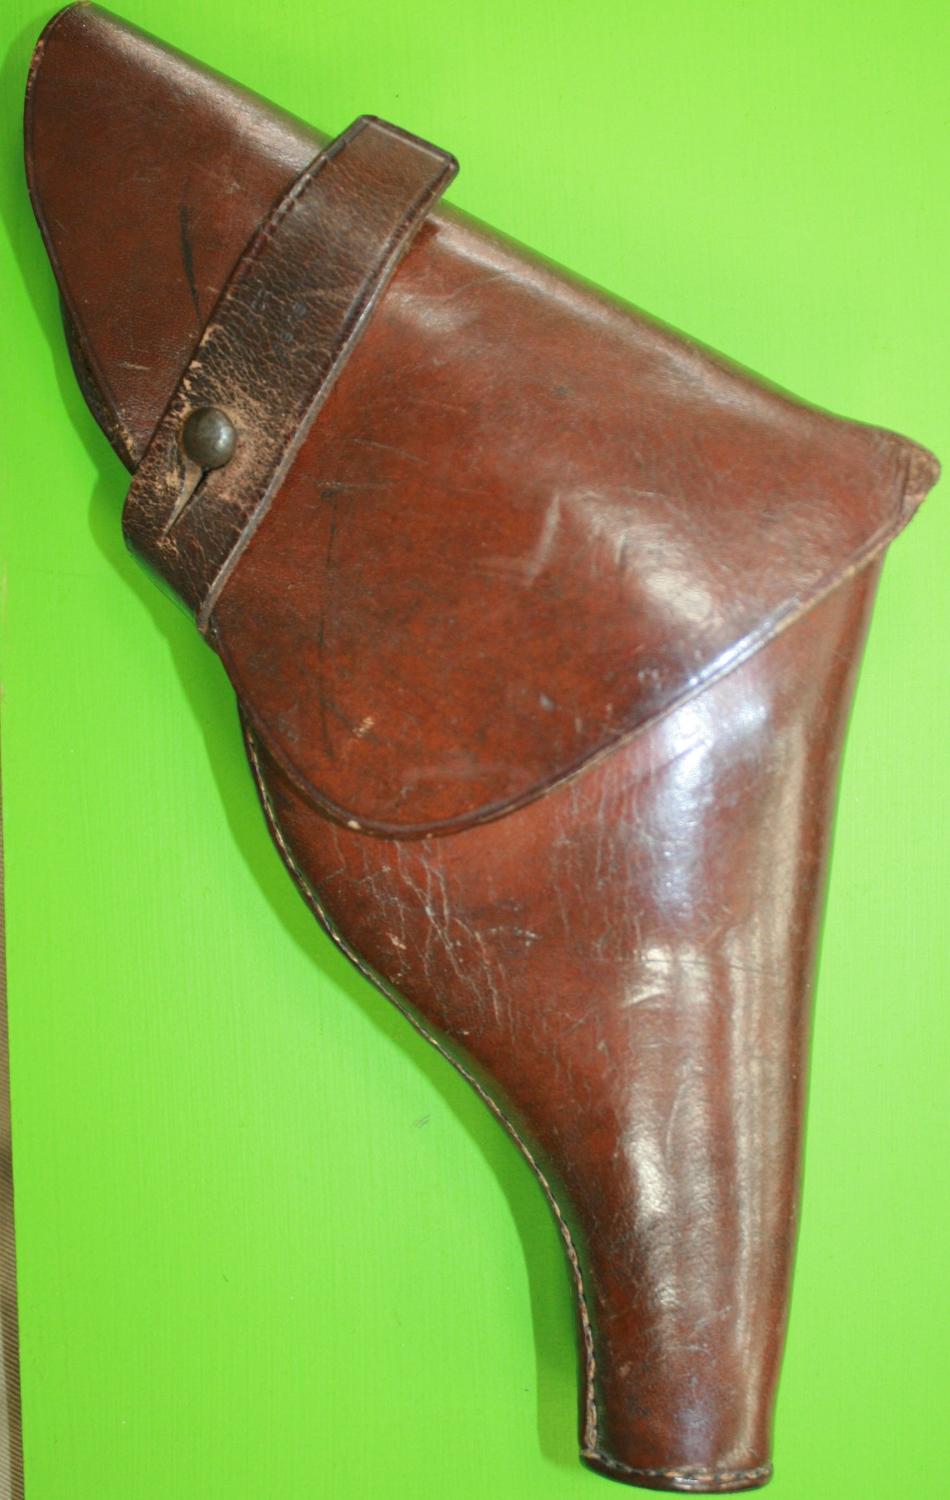 A 1916 DATED PRIVATE PISTOL HOLSTER MADE BY HGR SMALL SIZE